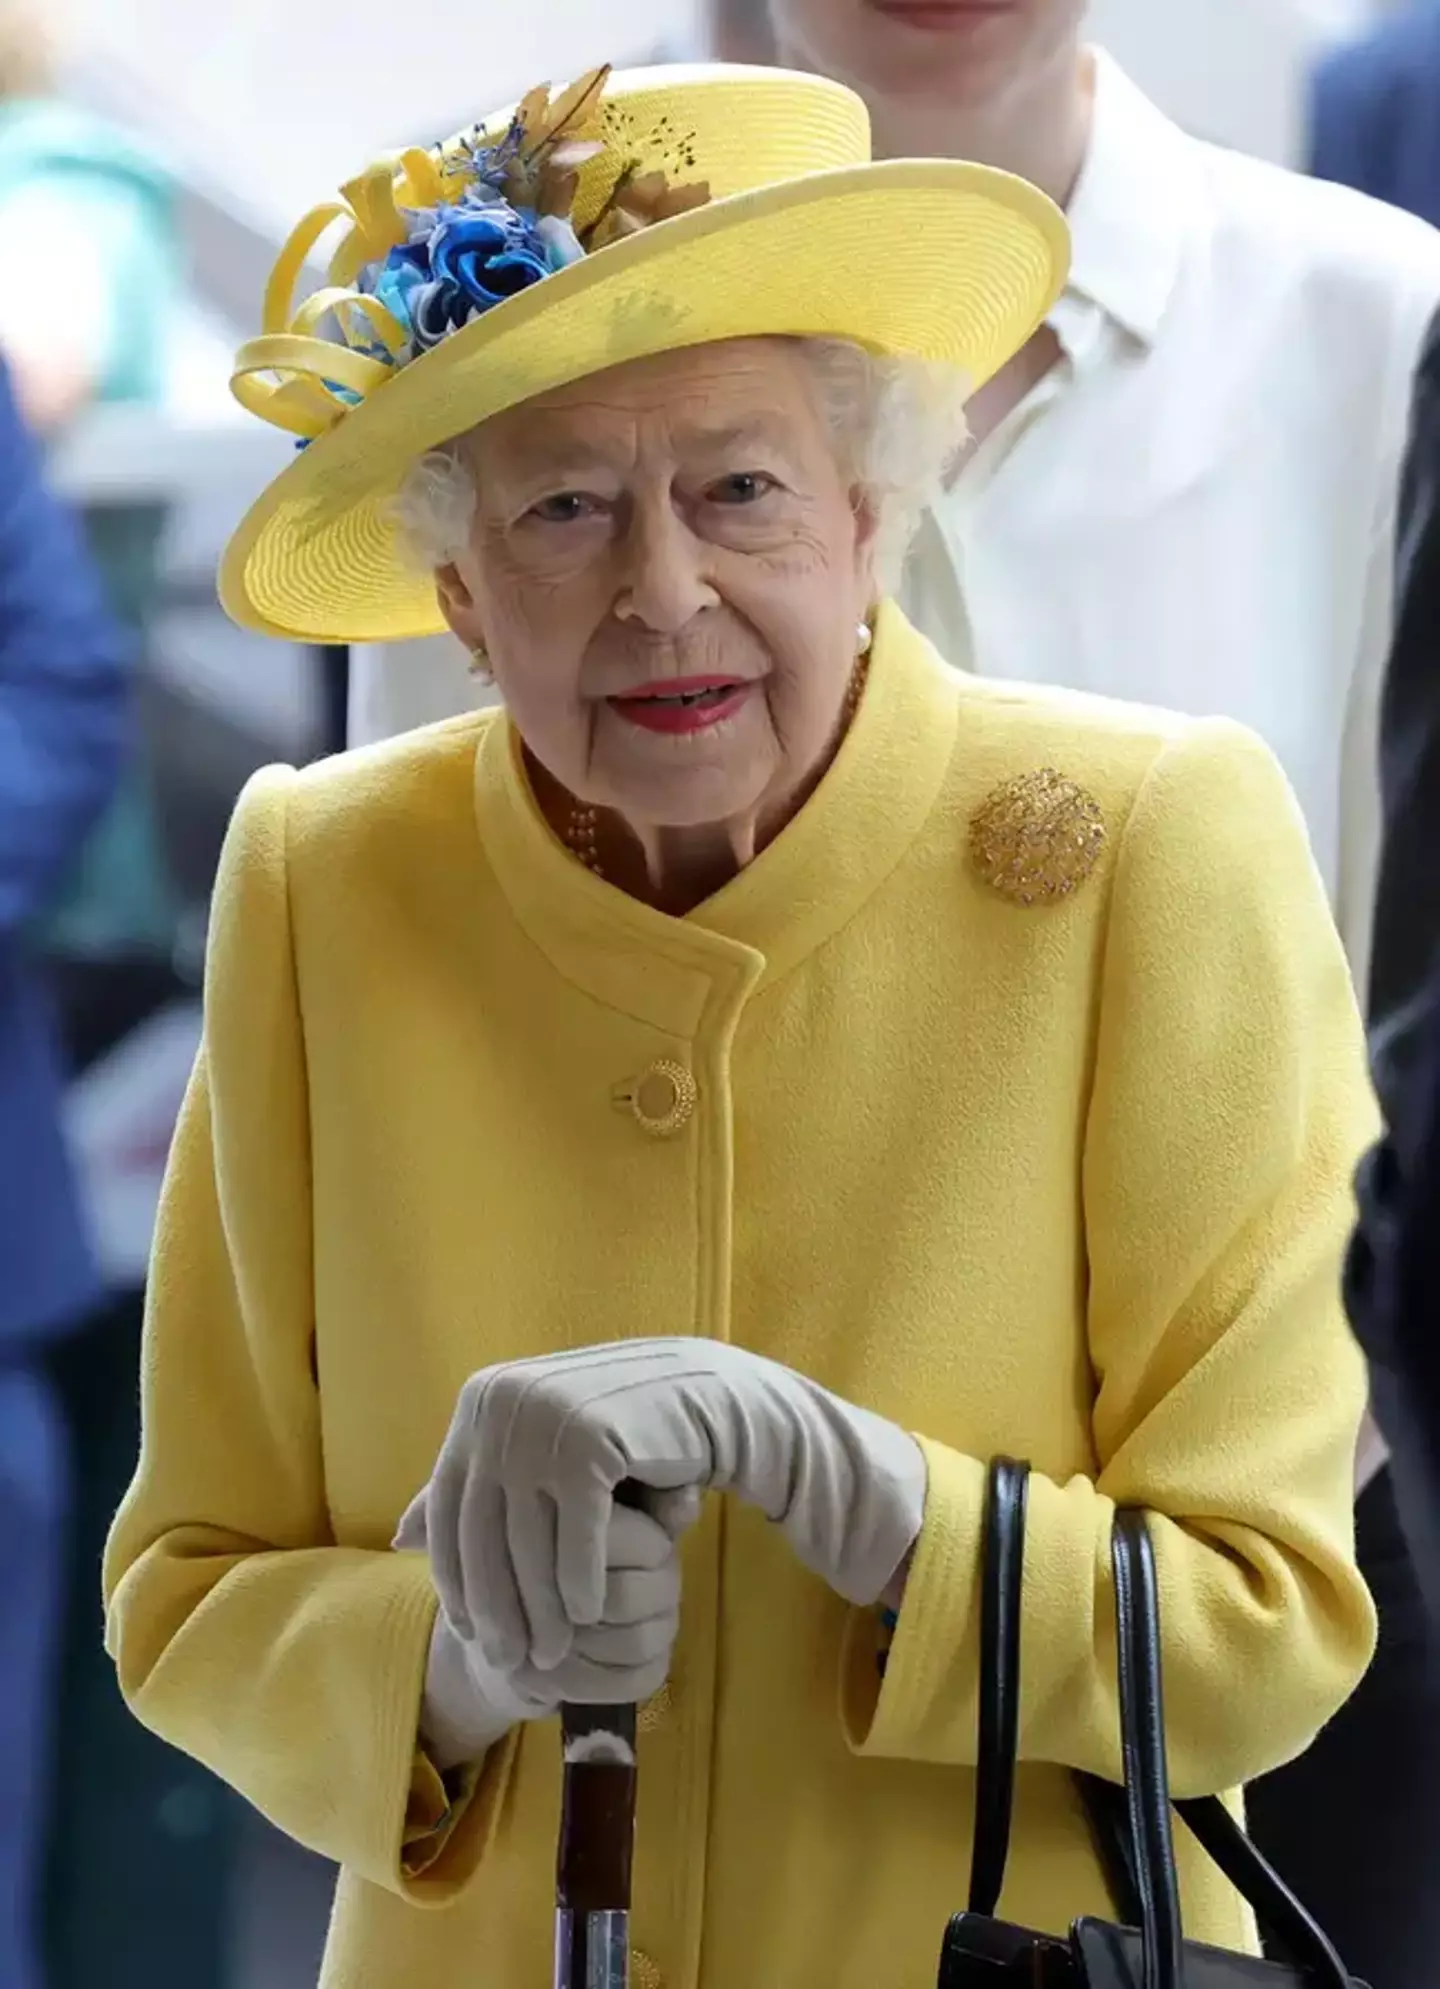 The Queen died at age 96.